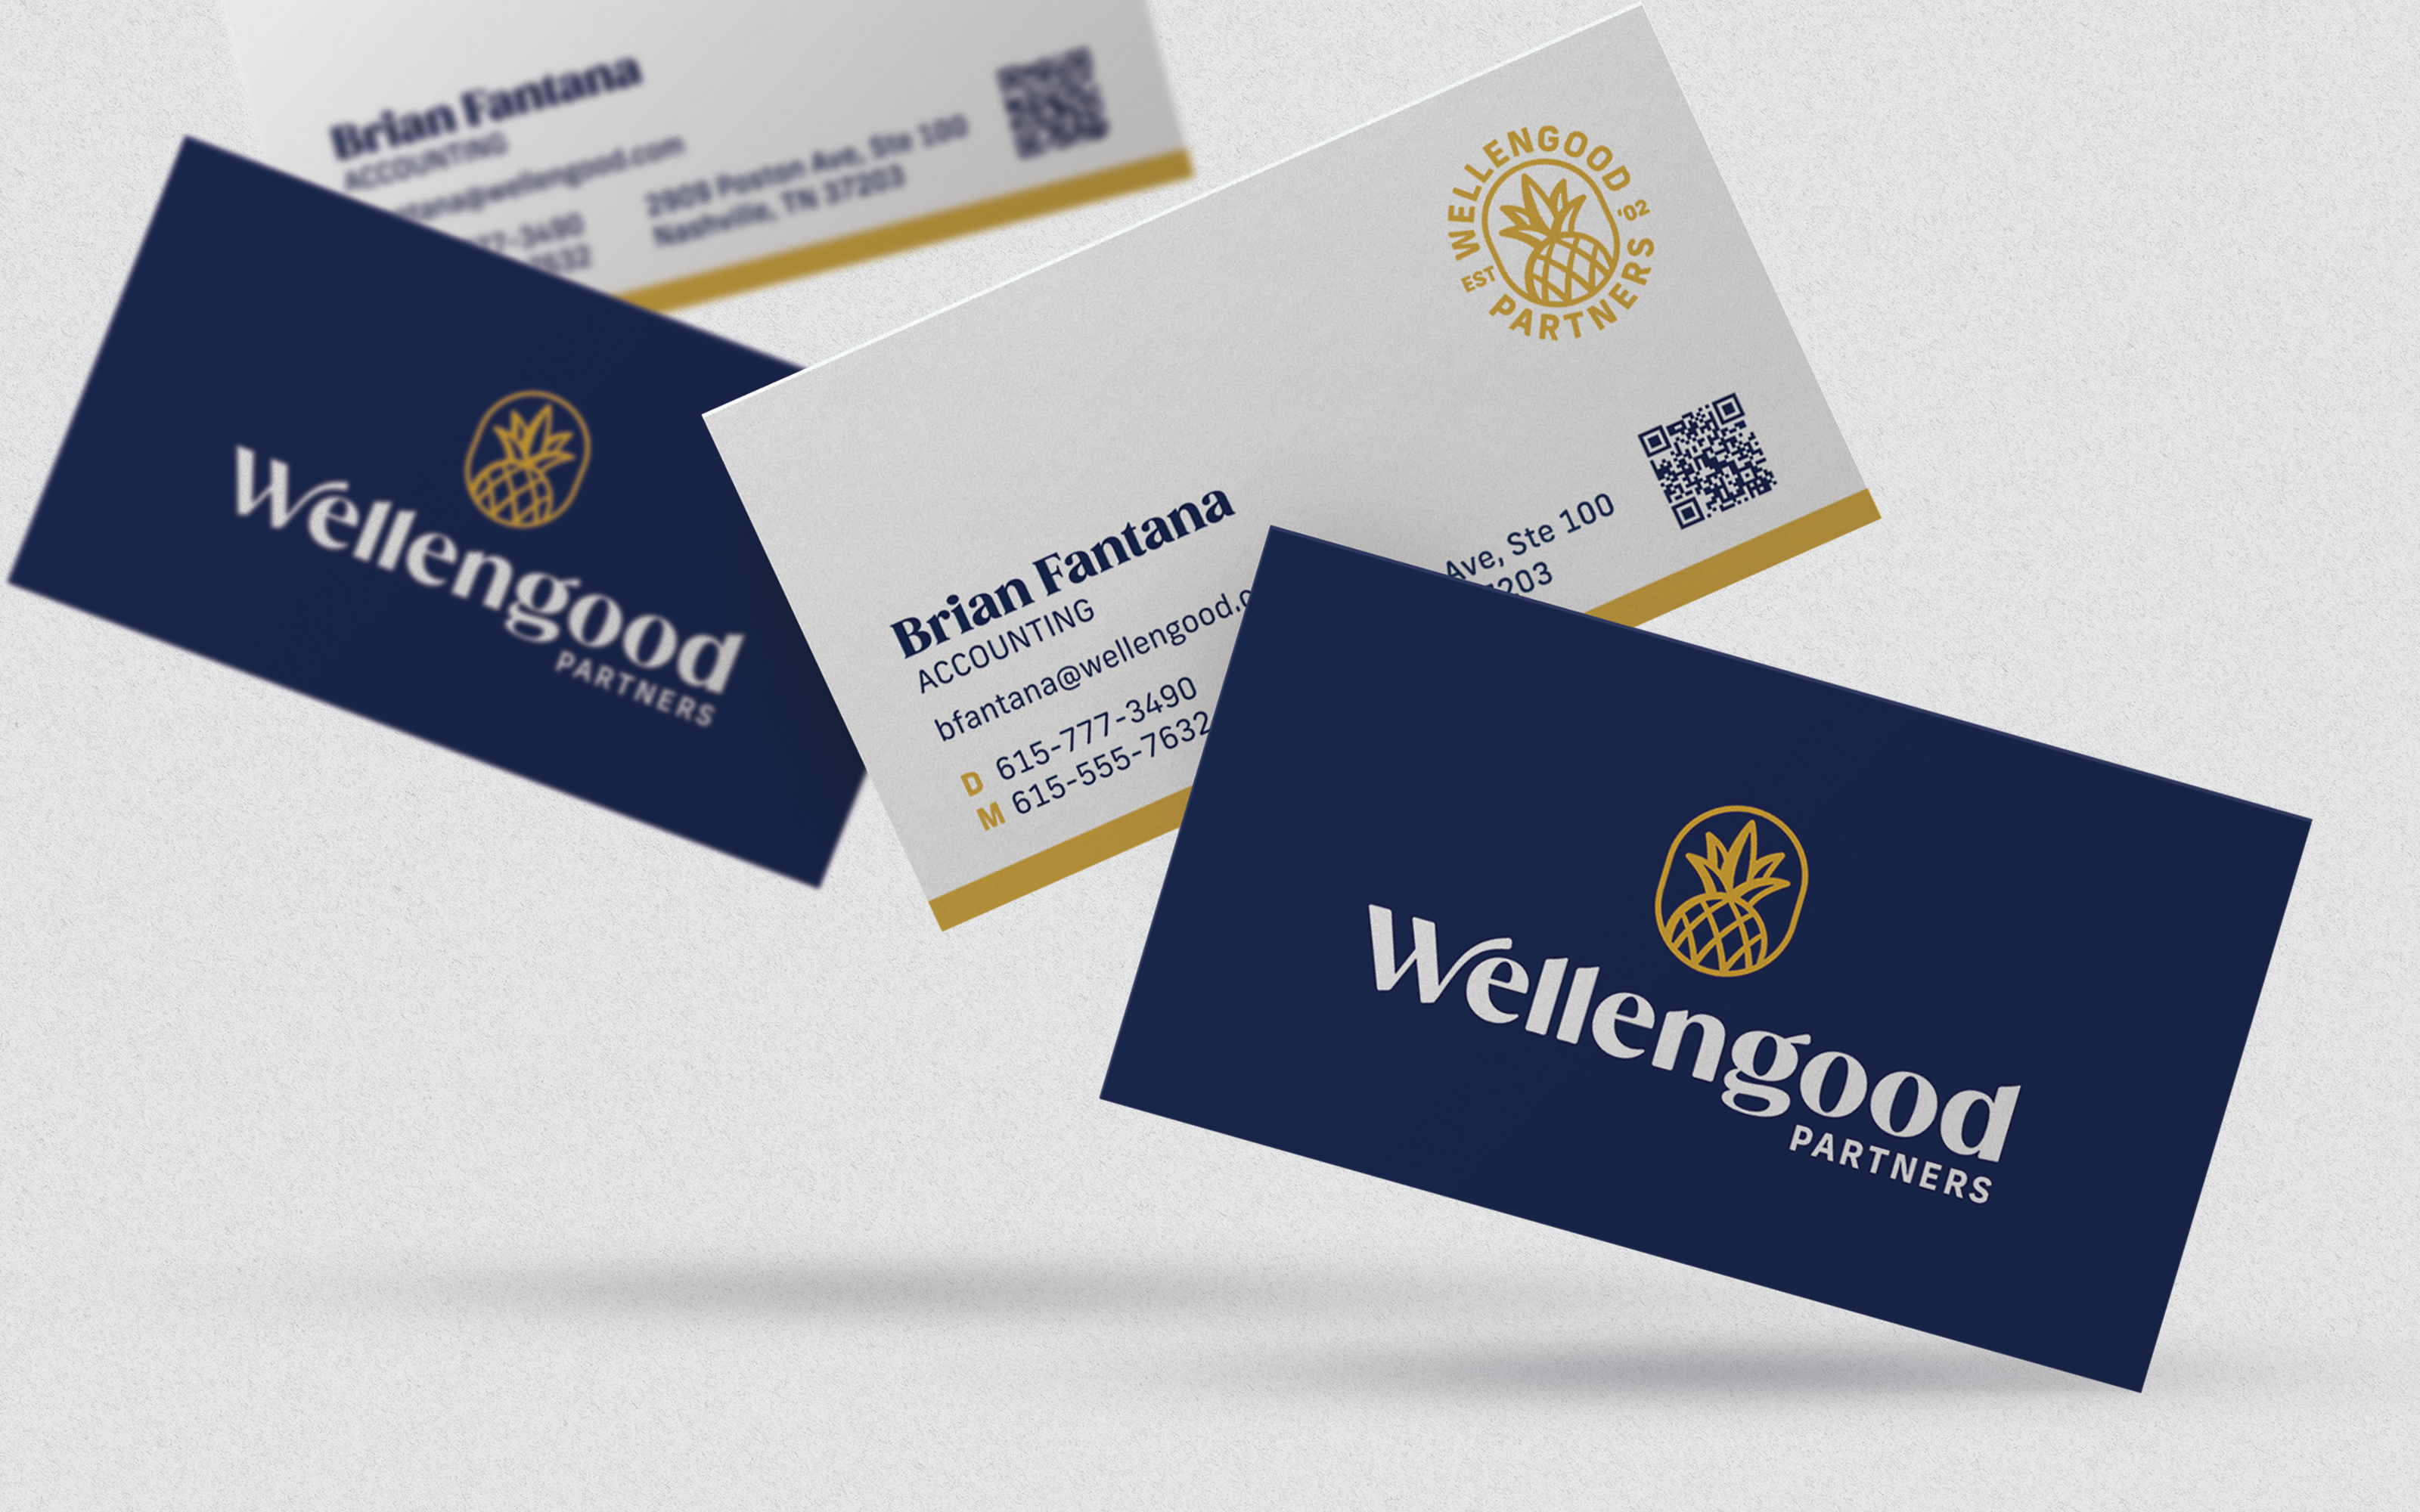 wellengood business cards on light background